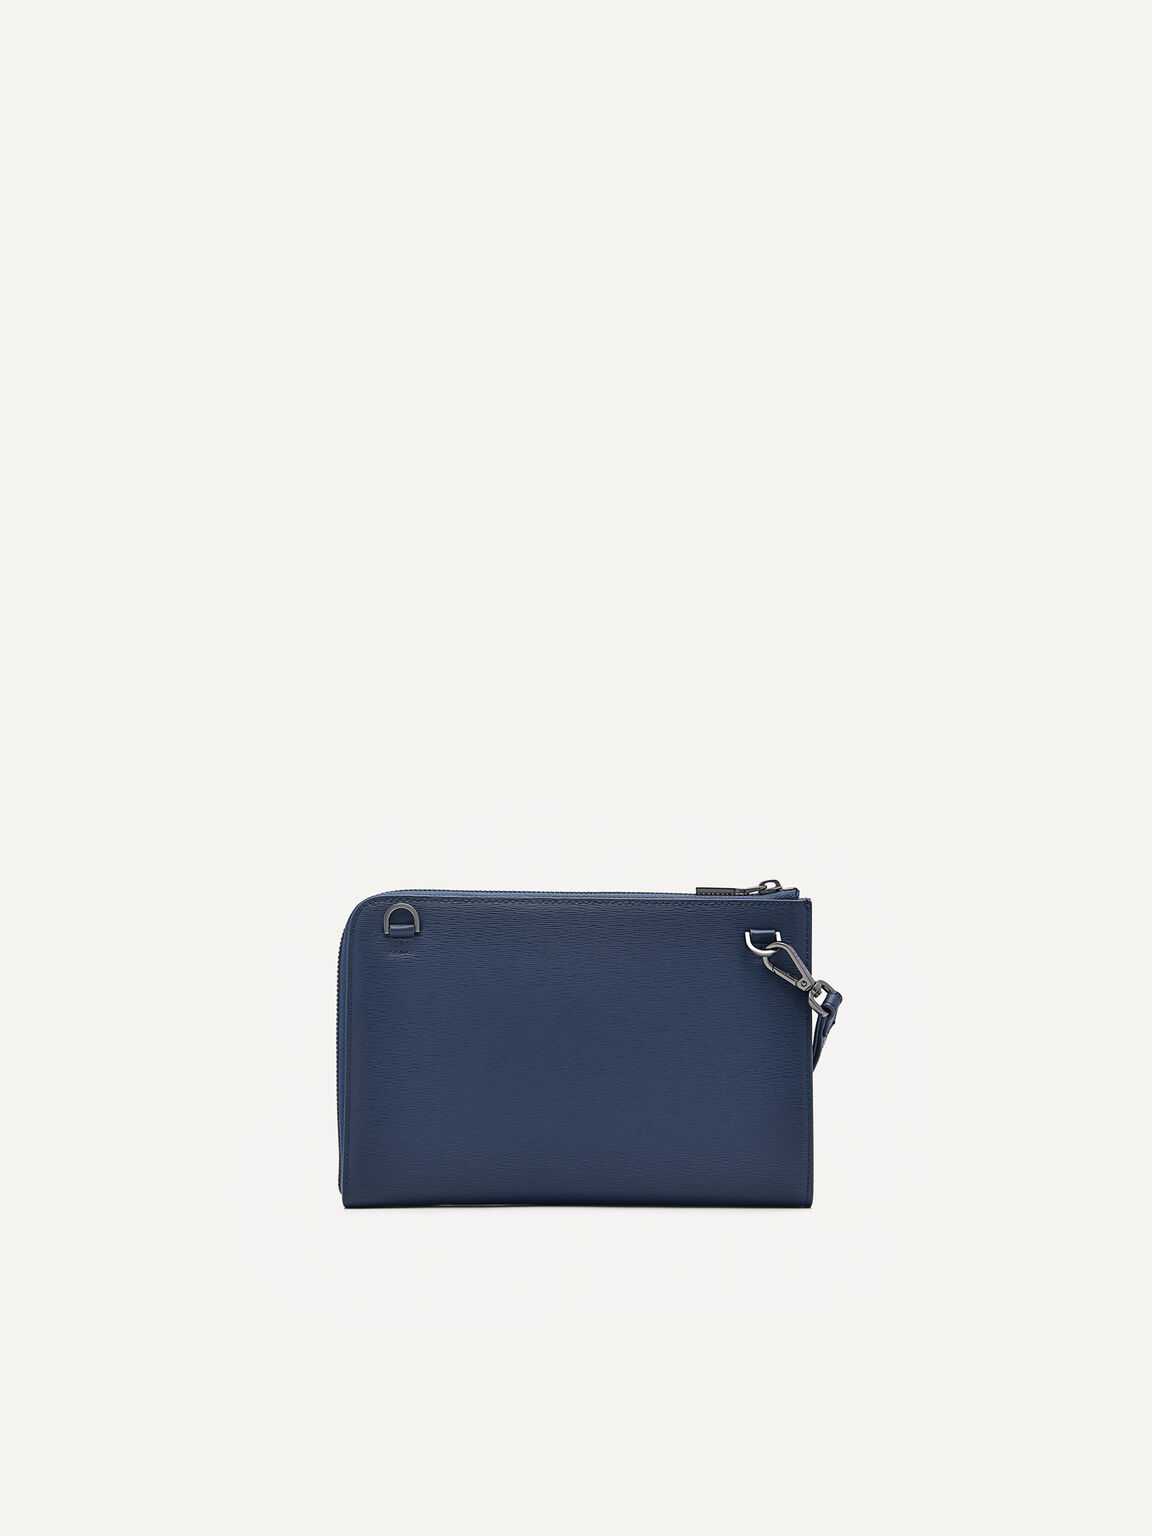 Henry Small Leather Clutch Bag, Navy